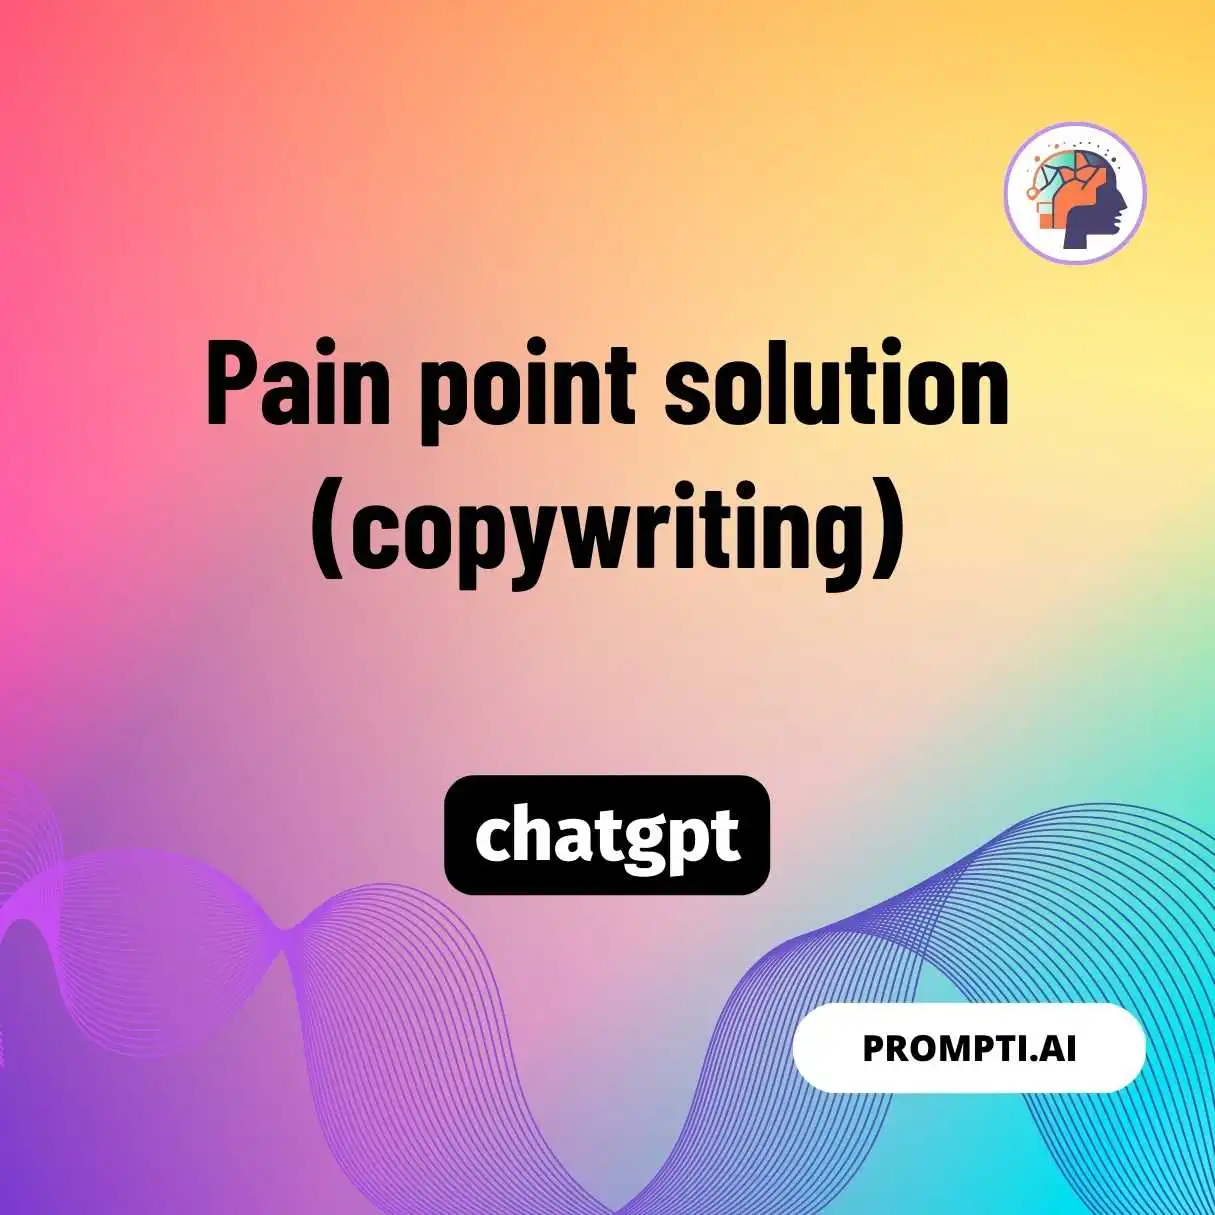 Pain point solution (copywriting)